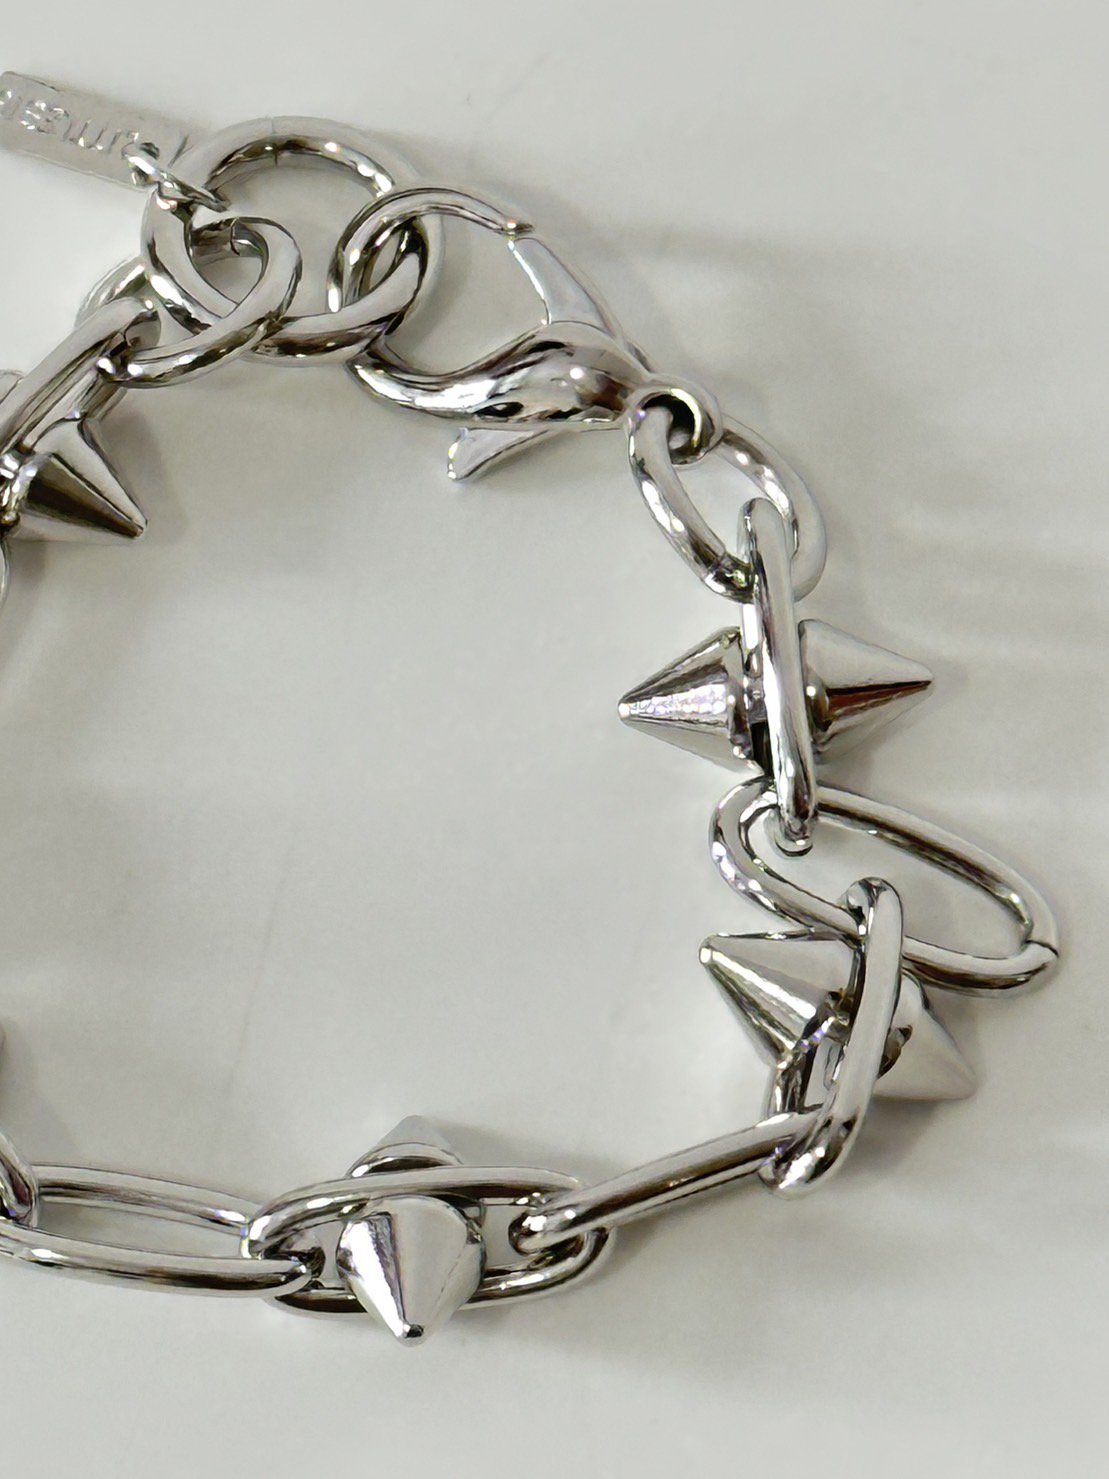 LITTLEBIG<br />Studded Bracelet / Silver<img class='new_mark_img2' src='https://img.shop-pro.jp/img/new/icons14.gif' style='border:none;display:inline;margin:0px;padding:0px;width:auto;' />